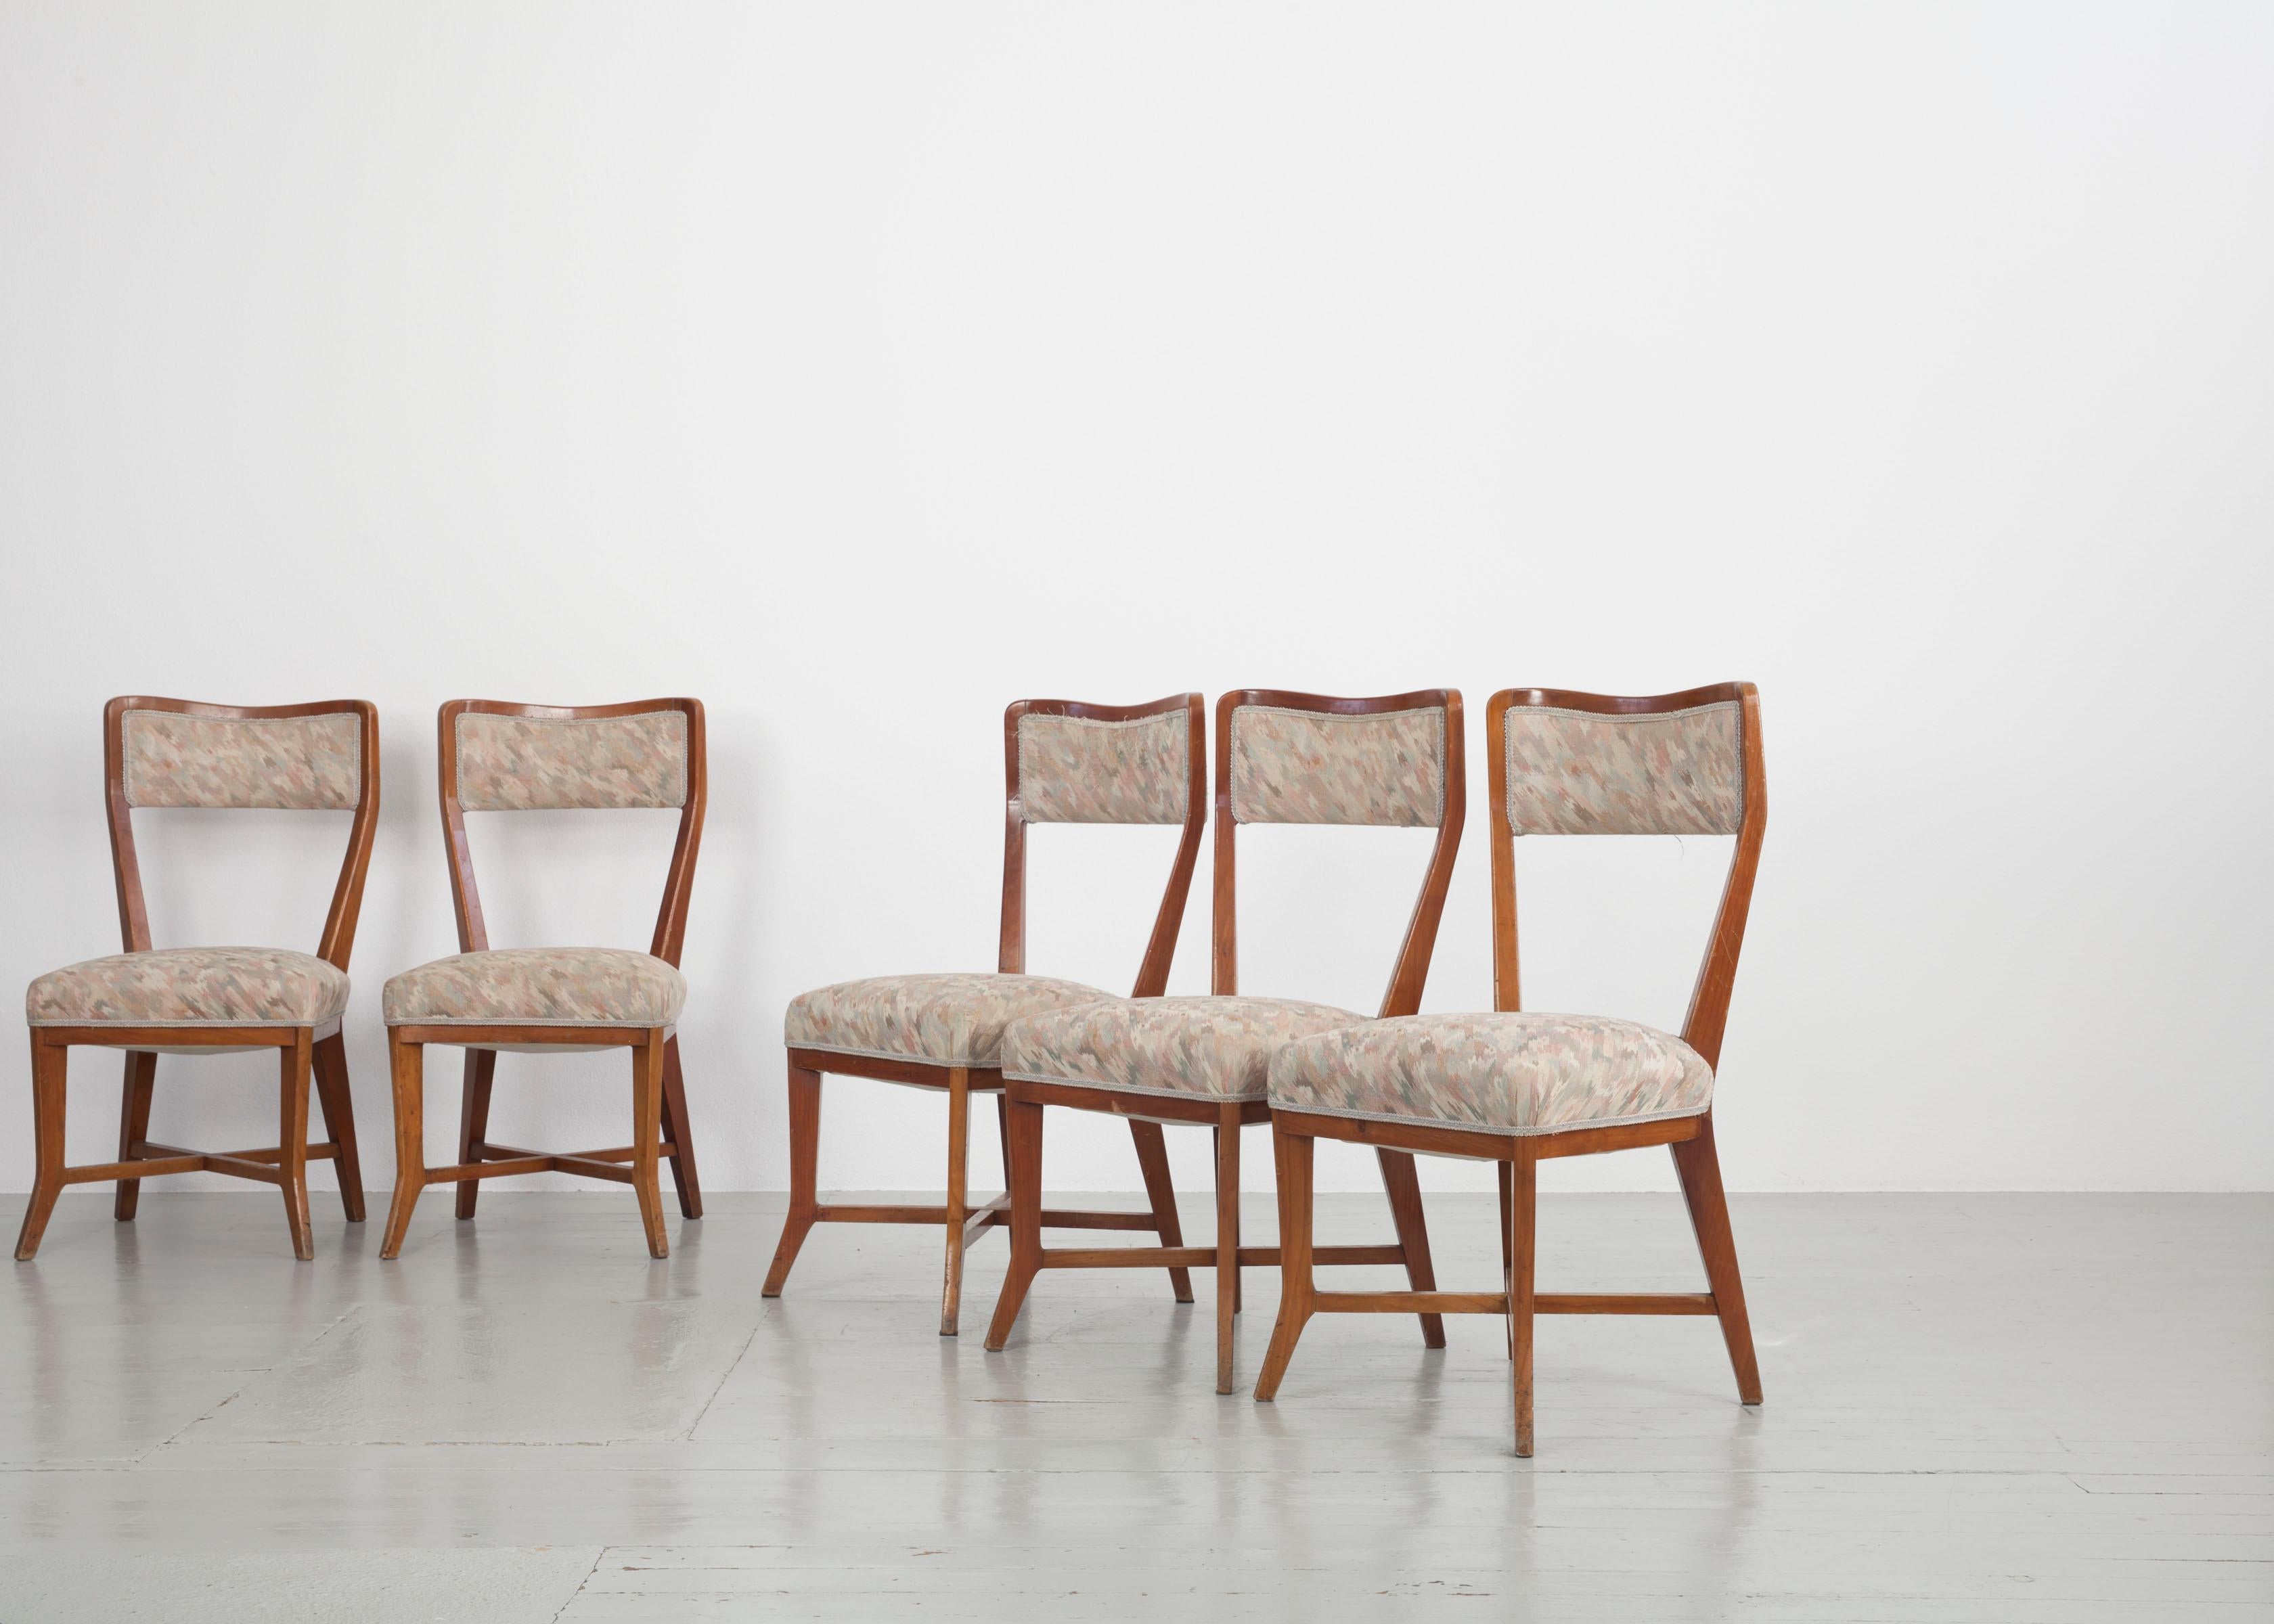 Set of 6 Melchiorre Bega Chairs Made of Cherrywood, Italy, 1950s For Sale 6